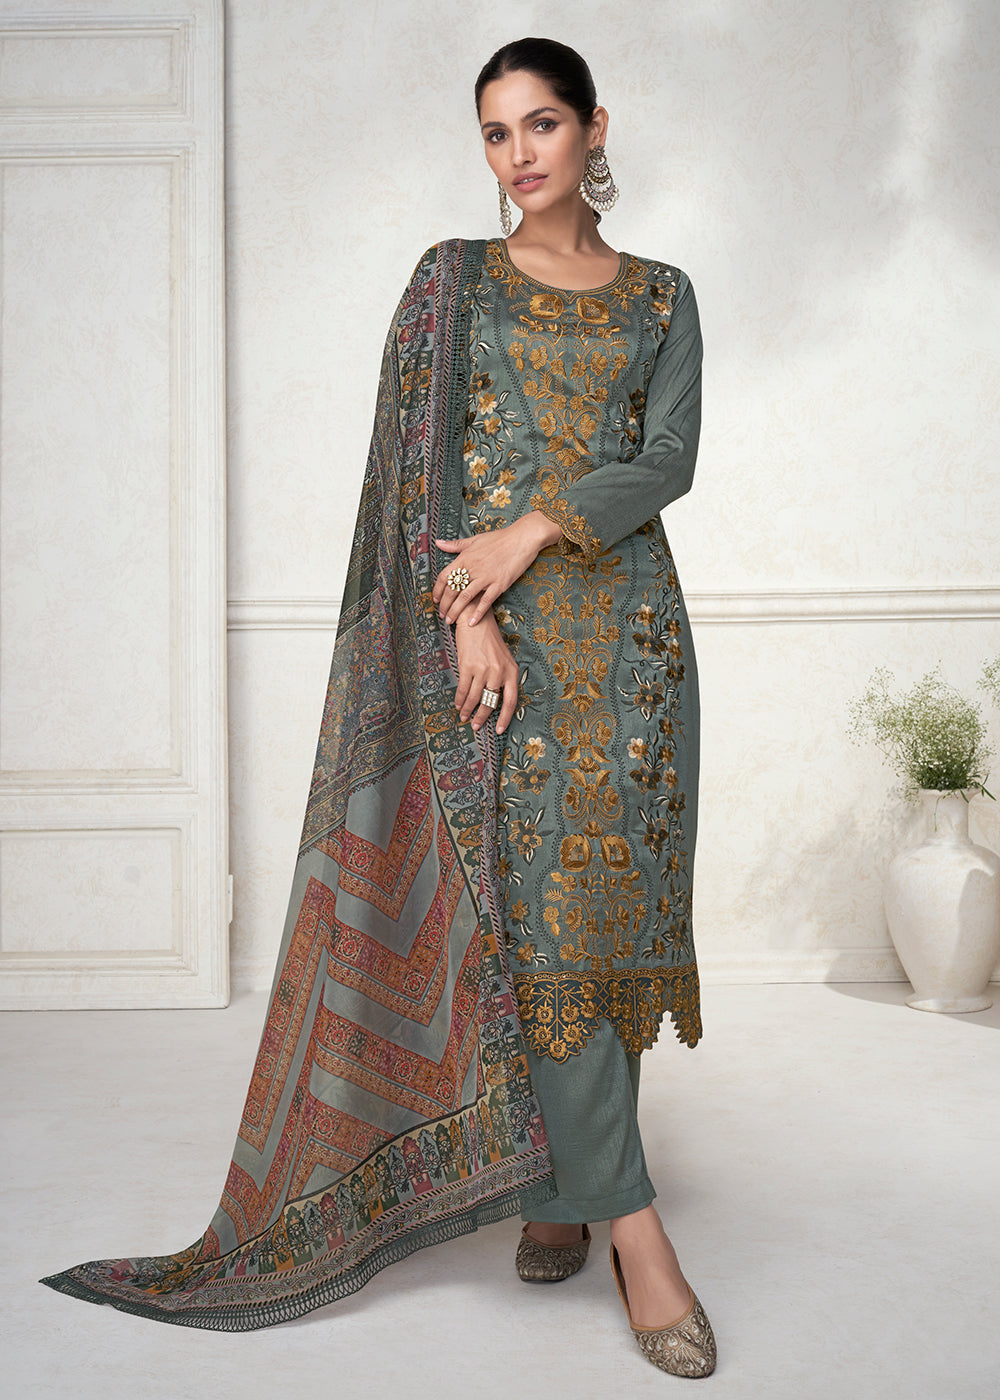 Buy Now Fabulous Grey Floral Embroidered Silk Wedding Salwar Suit Online in USA, UK, Canada, Germany, Australia & Worldwide at Empress Clothing. 